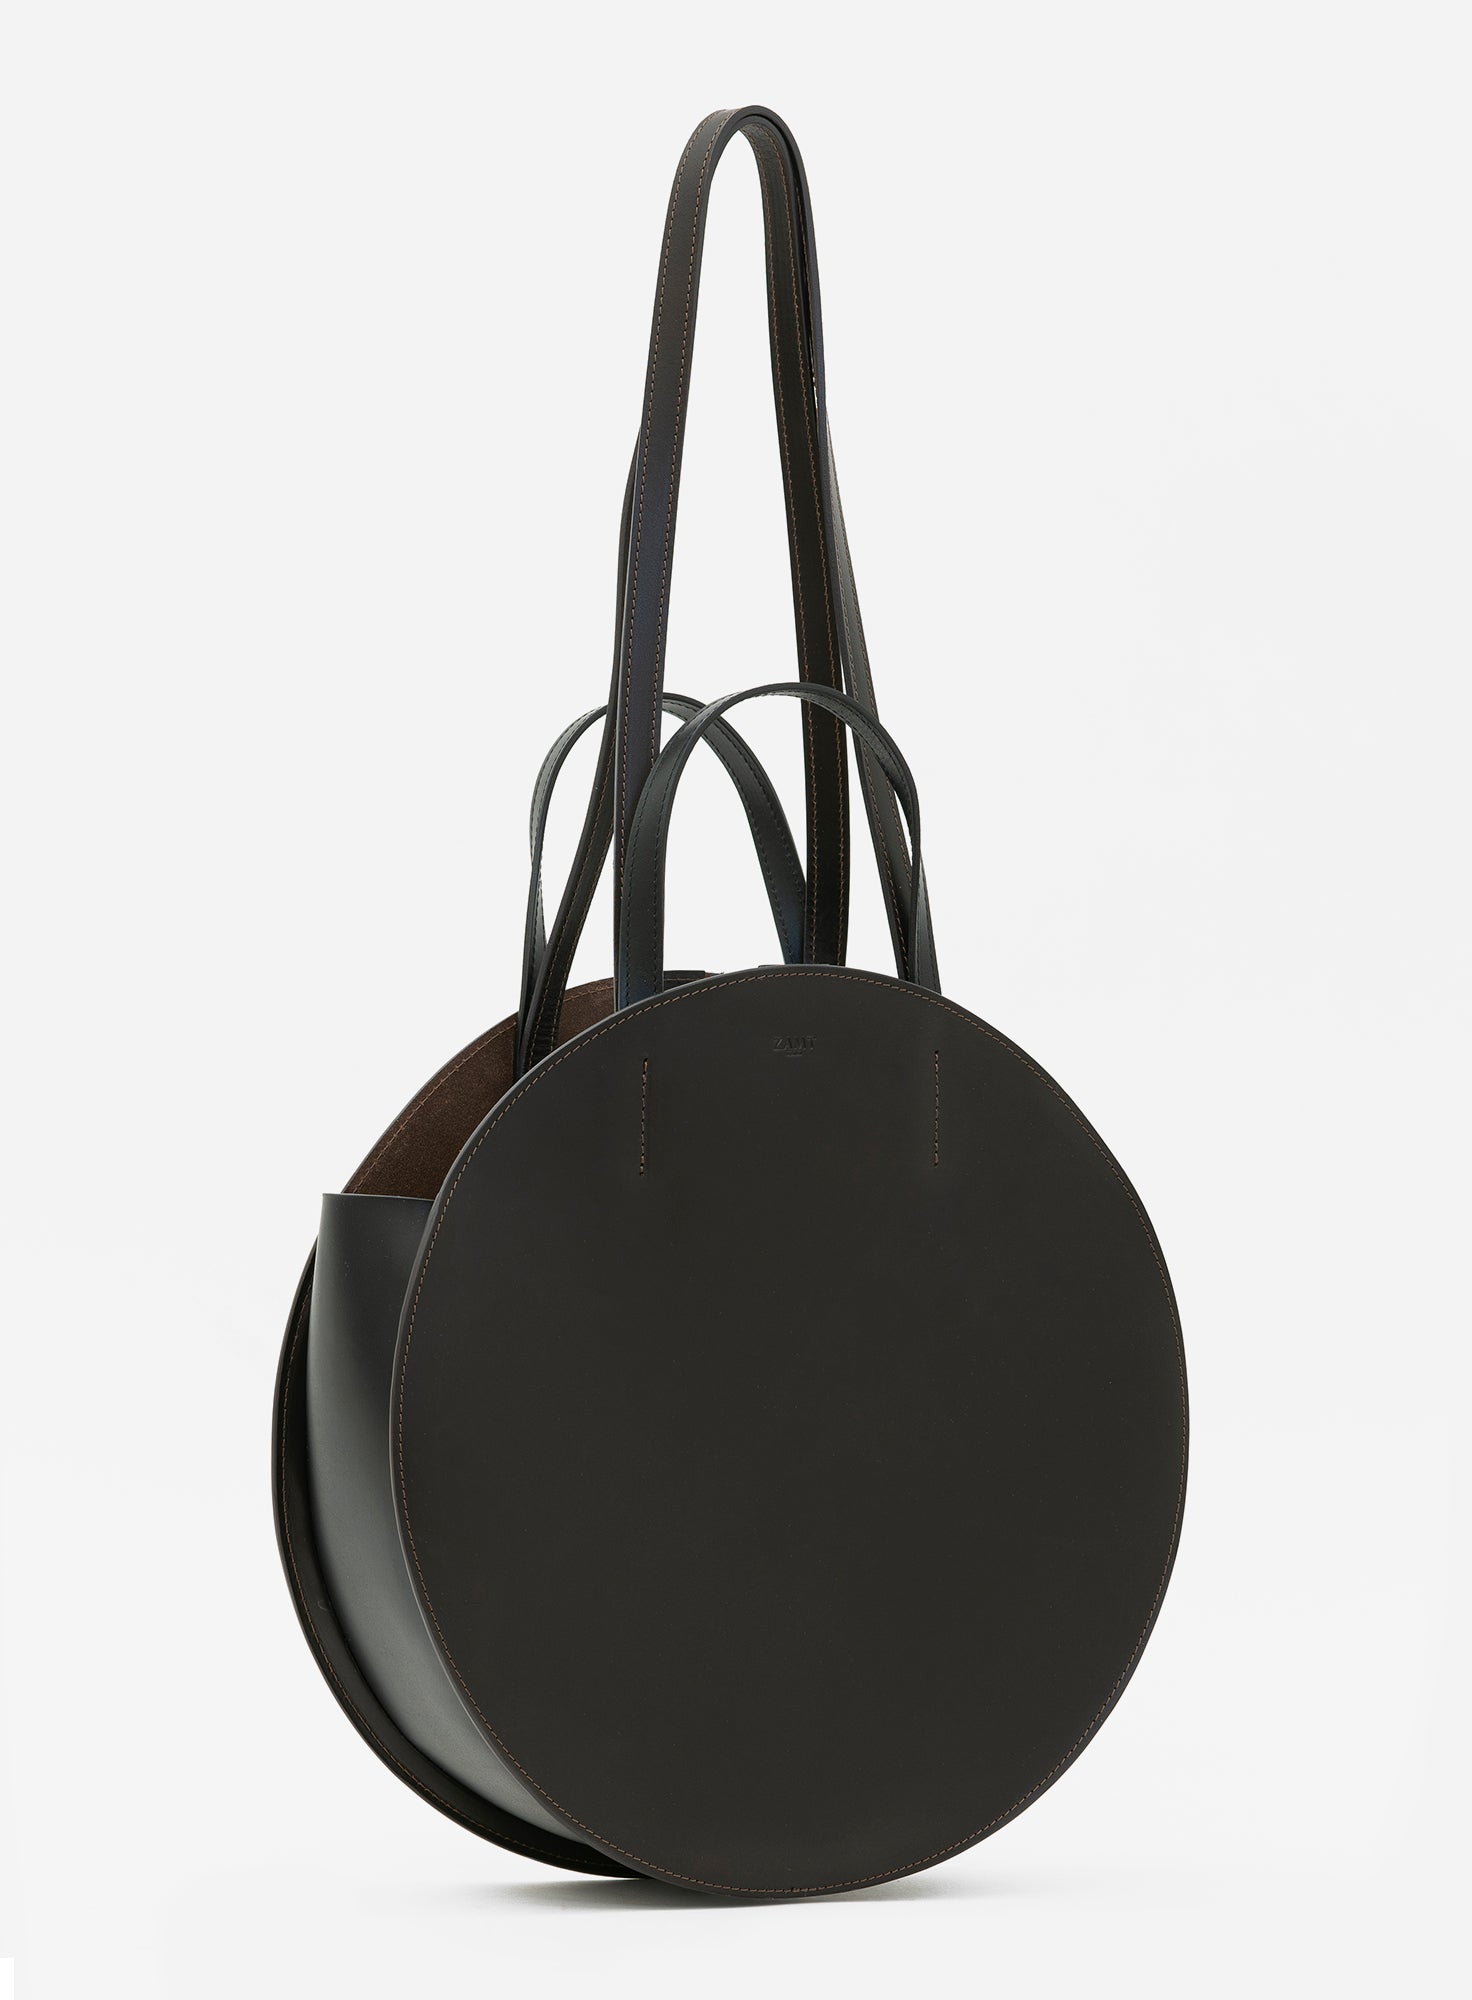 ROUND_Bag_Myra_CAFE_Designed_in_Berlin_Made_to_last_Handmade_in_Portugal.